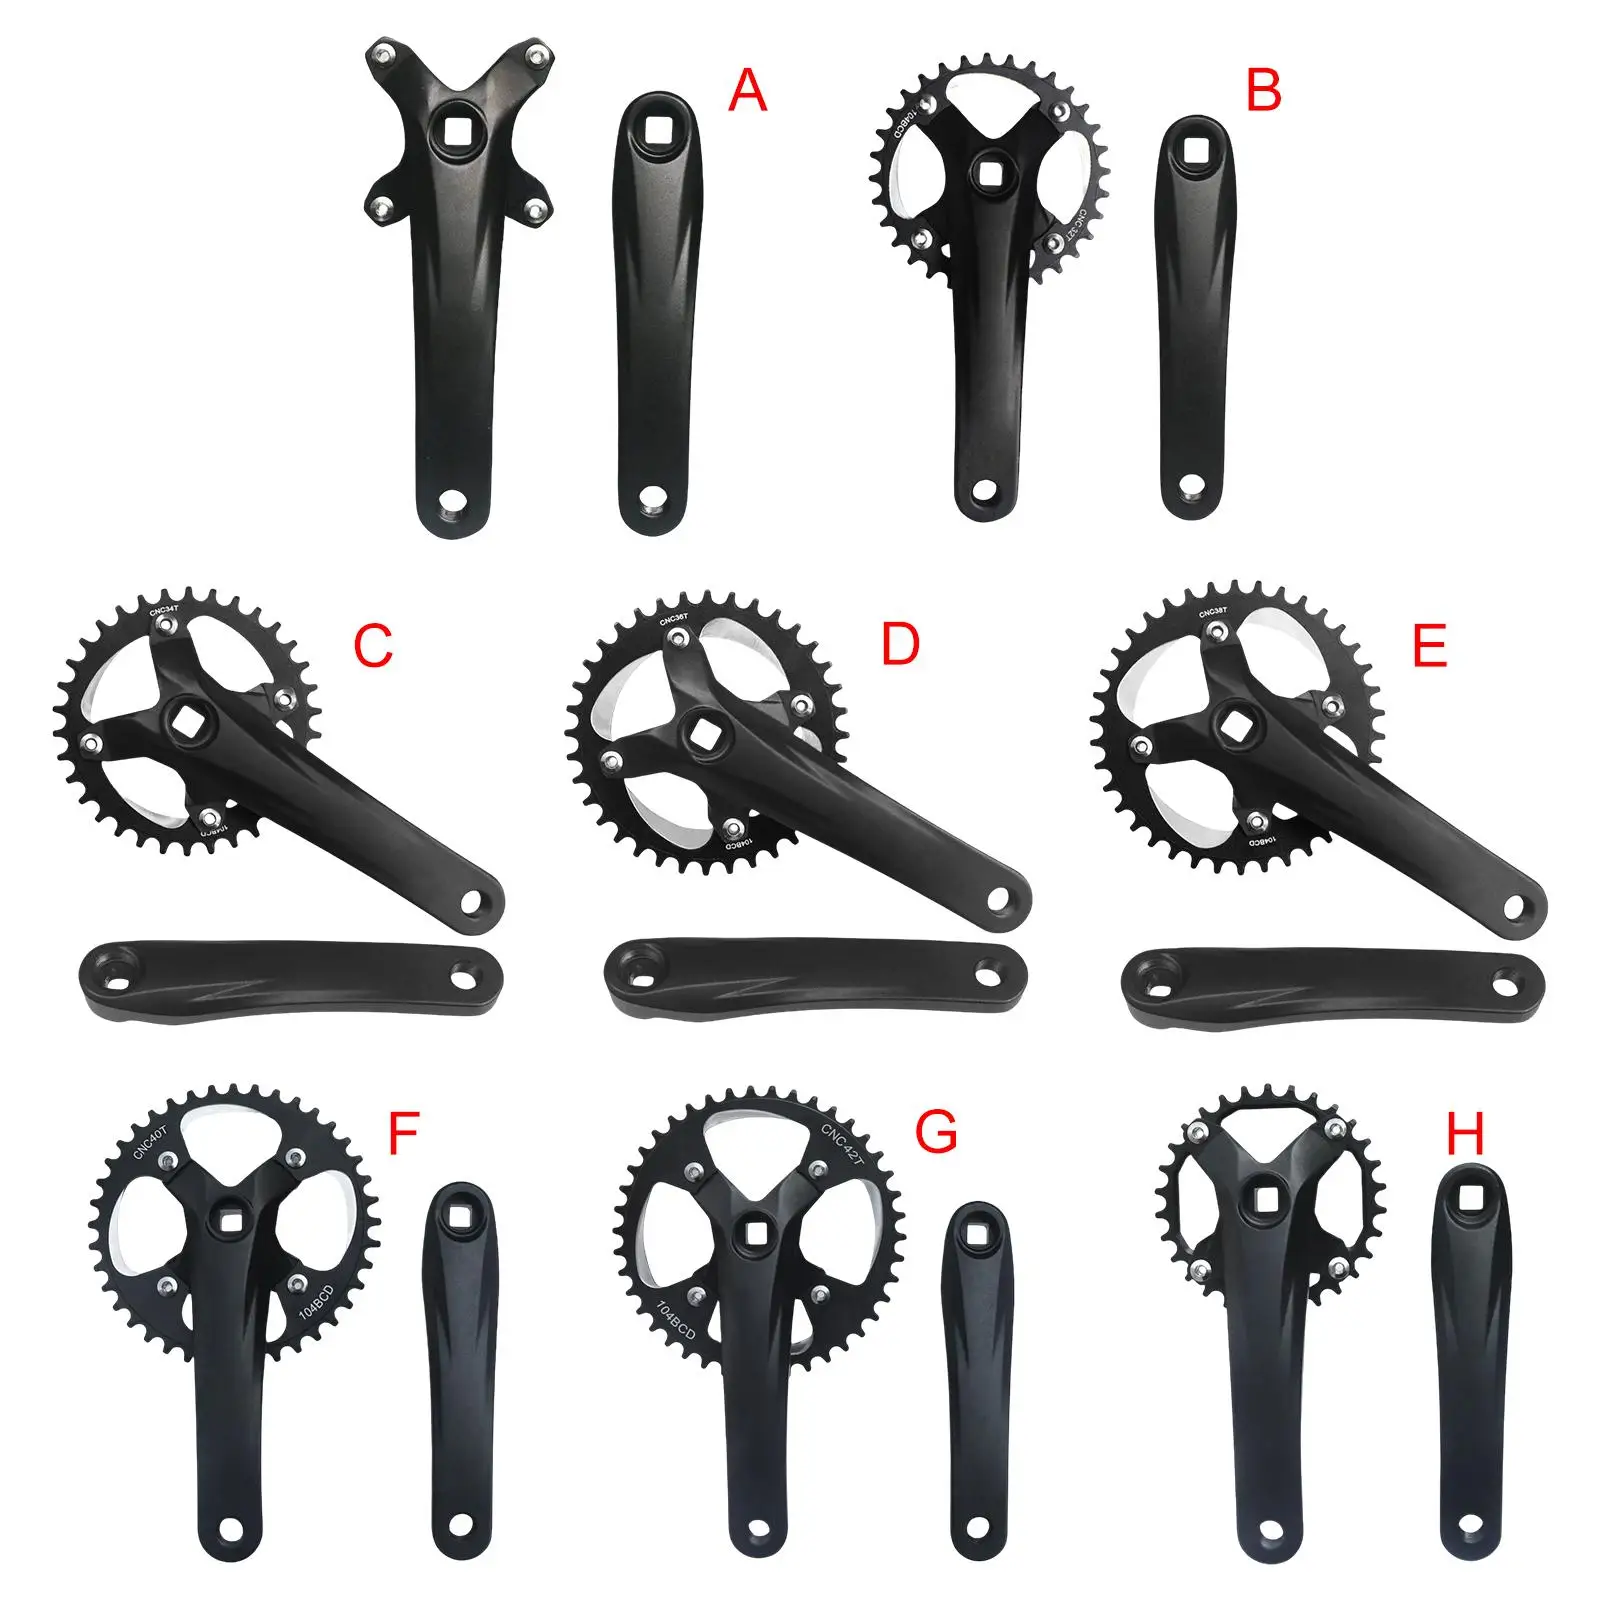 

Square Hole Mountain Bike Crank, 104BCD Replacement for Bicycle Folding Bike Sports BMX